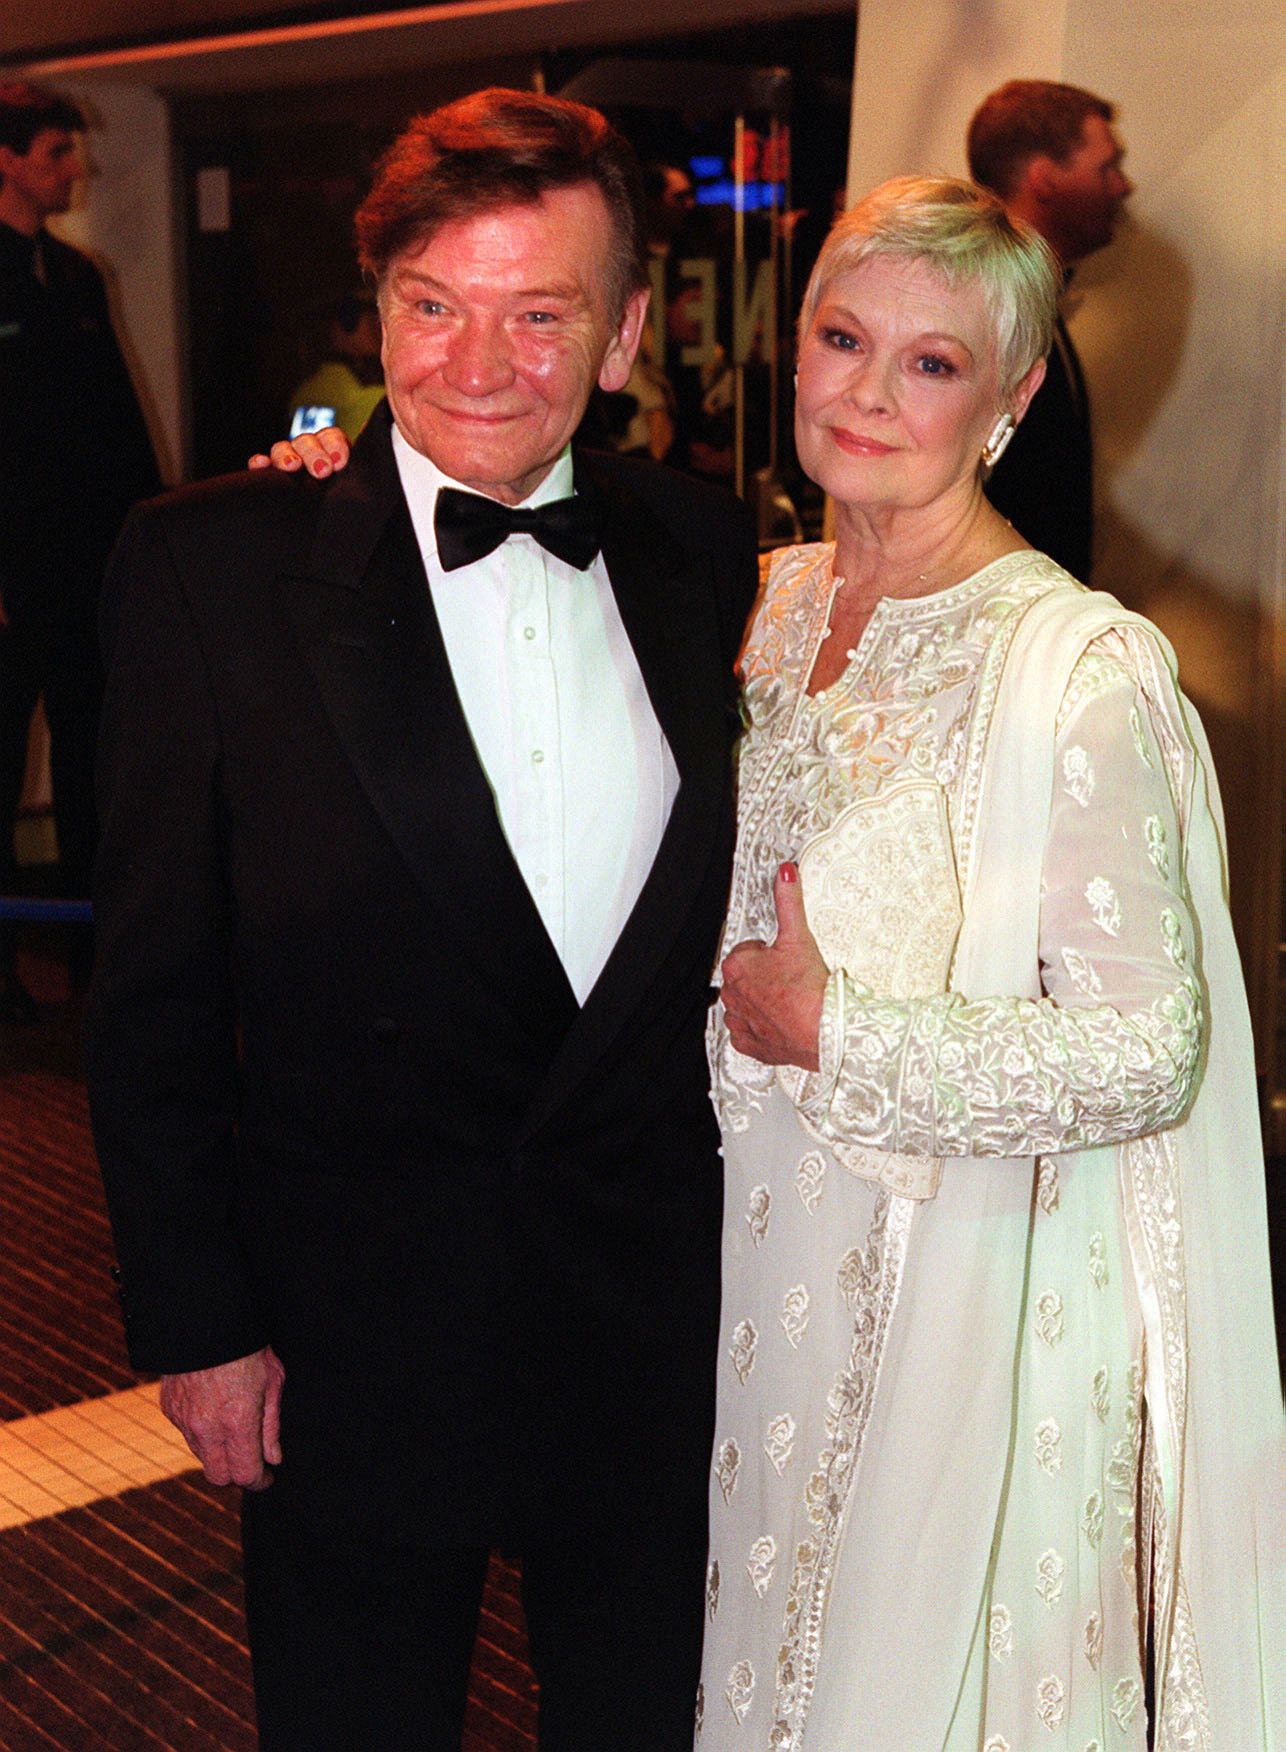 Dame Judi Dench and Michael Williams arrive at the European Charity Premiere of the James Bond film "The World Is Not Enough" at the Odeon Leicester Square, London, on November 22, 1999. | Source: Getty Images